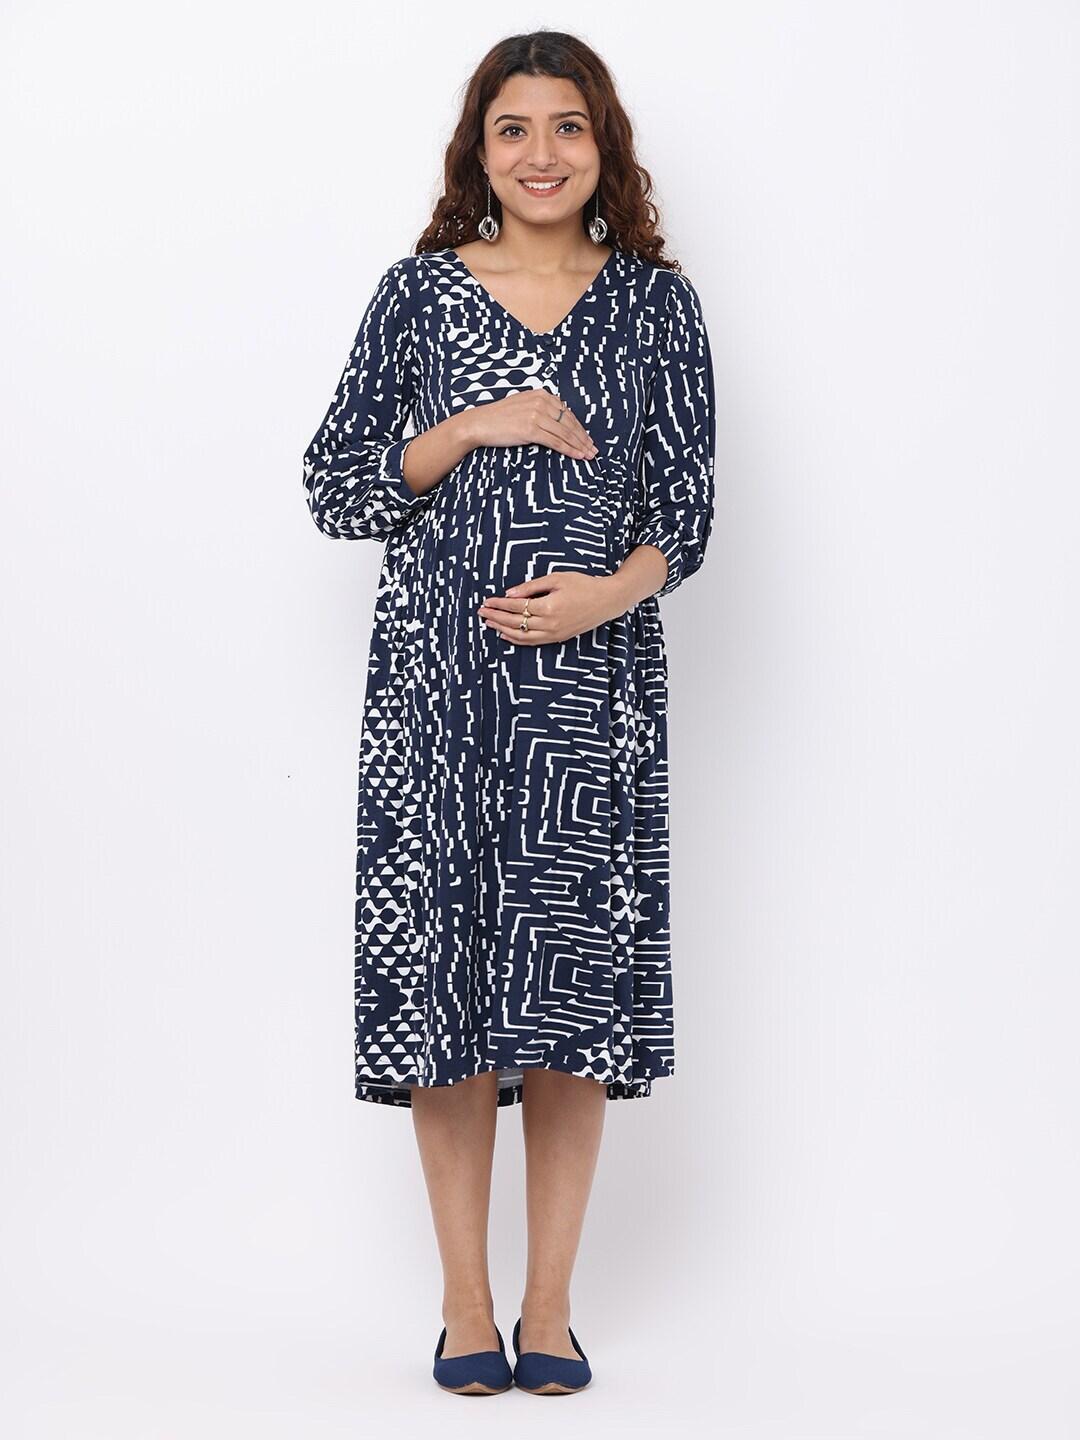 The Mom Store Navy Blue & White Abstract Printed Maternity Midi Dress